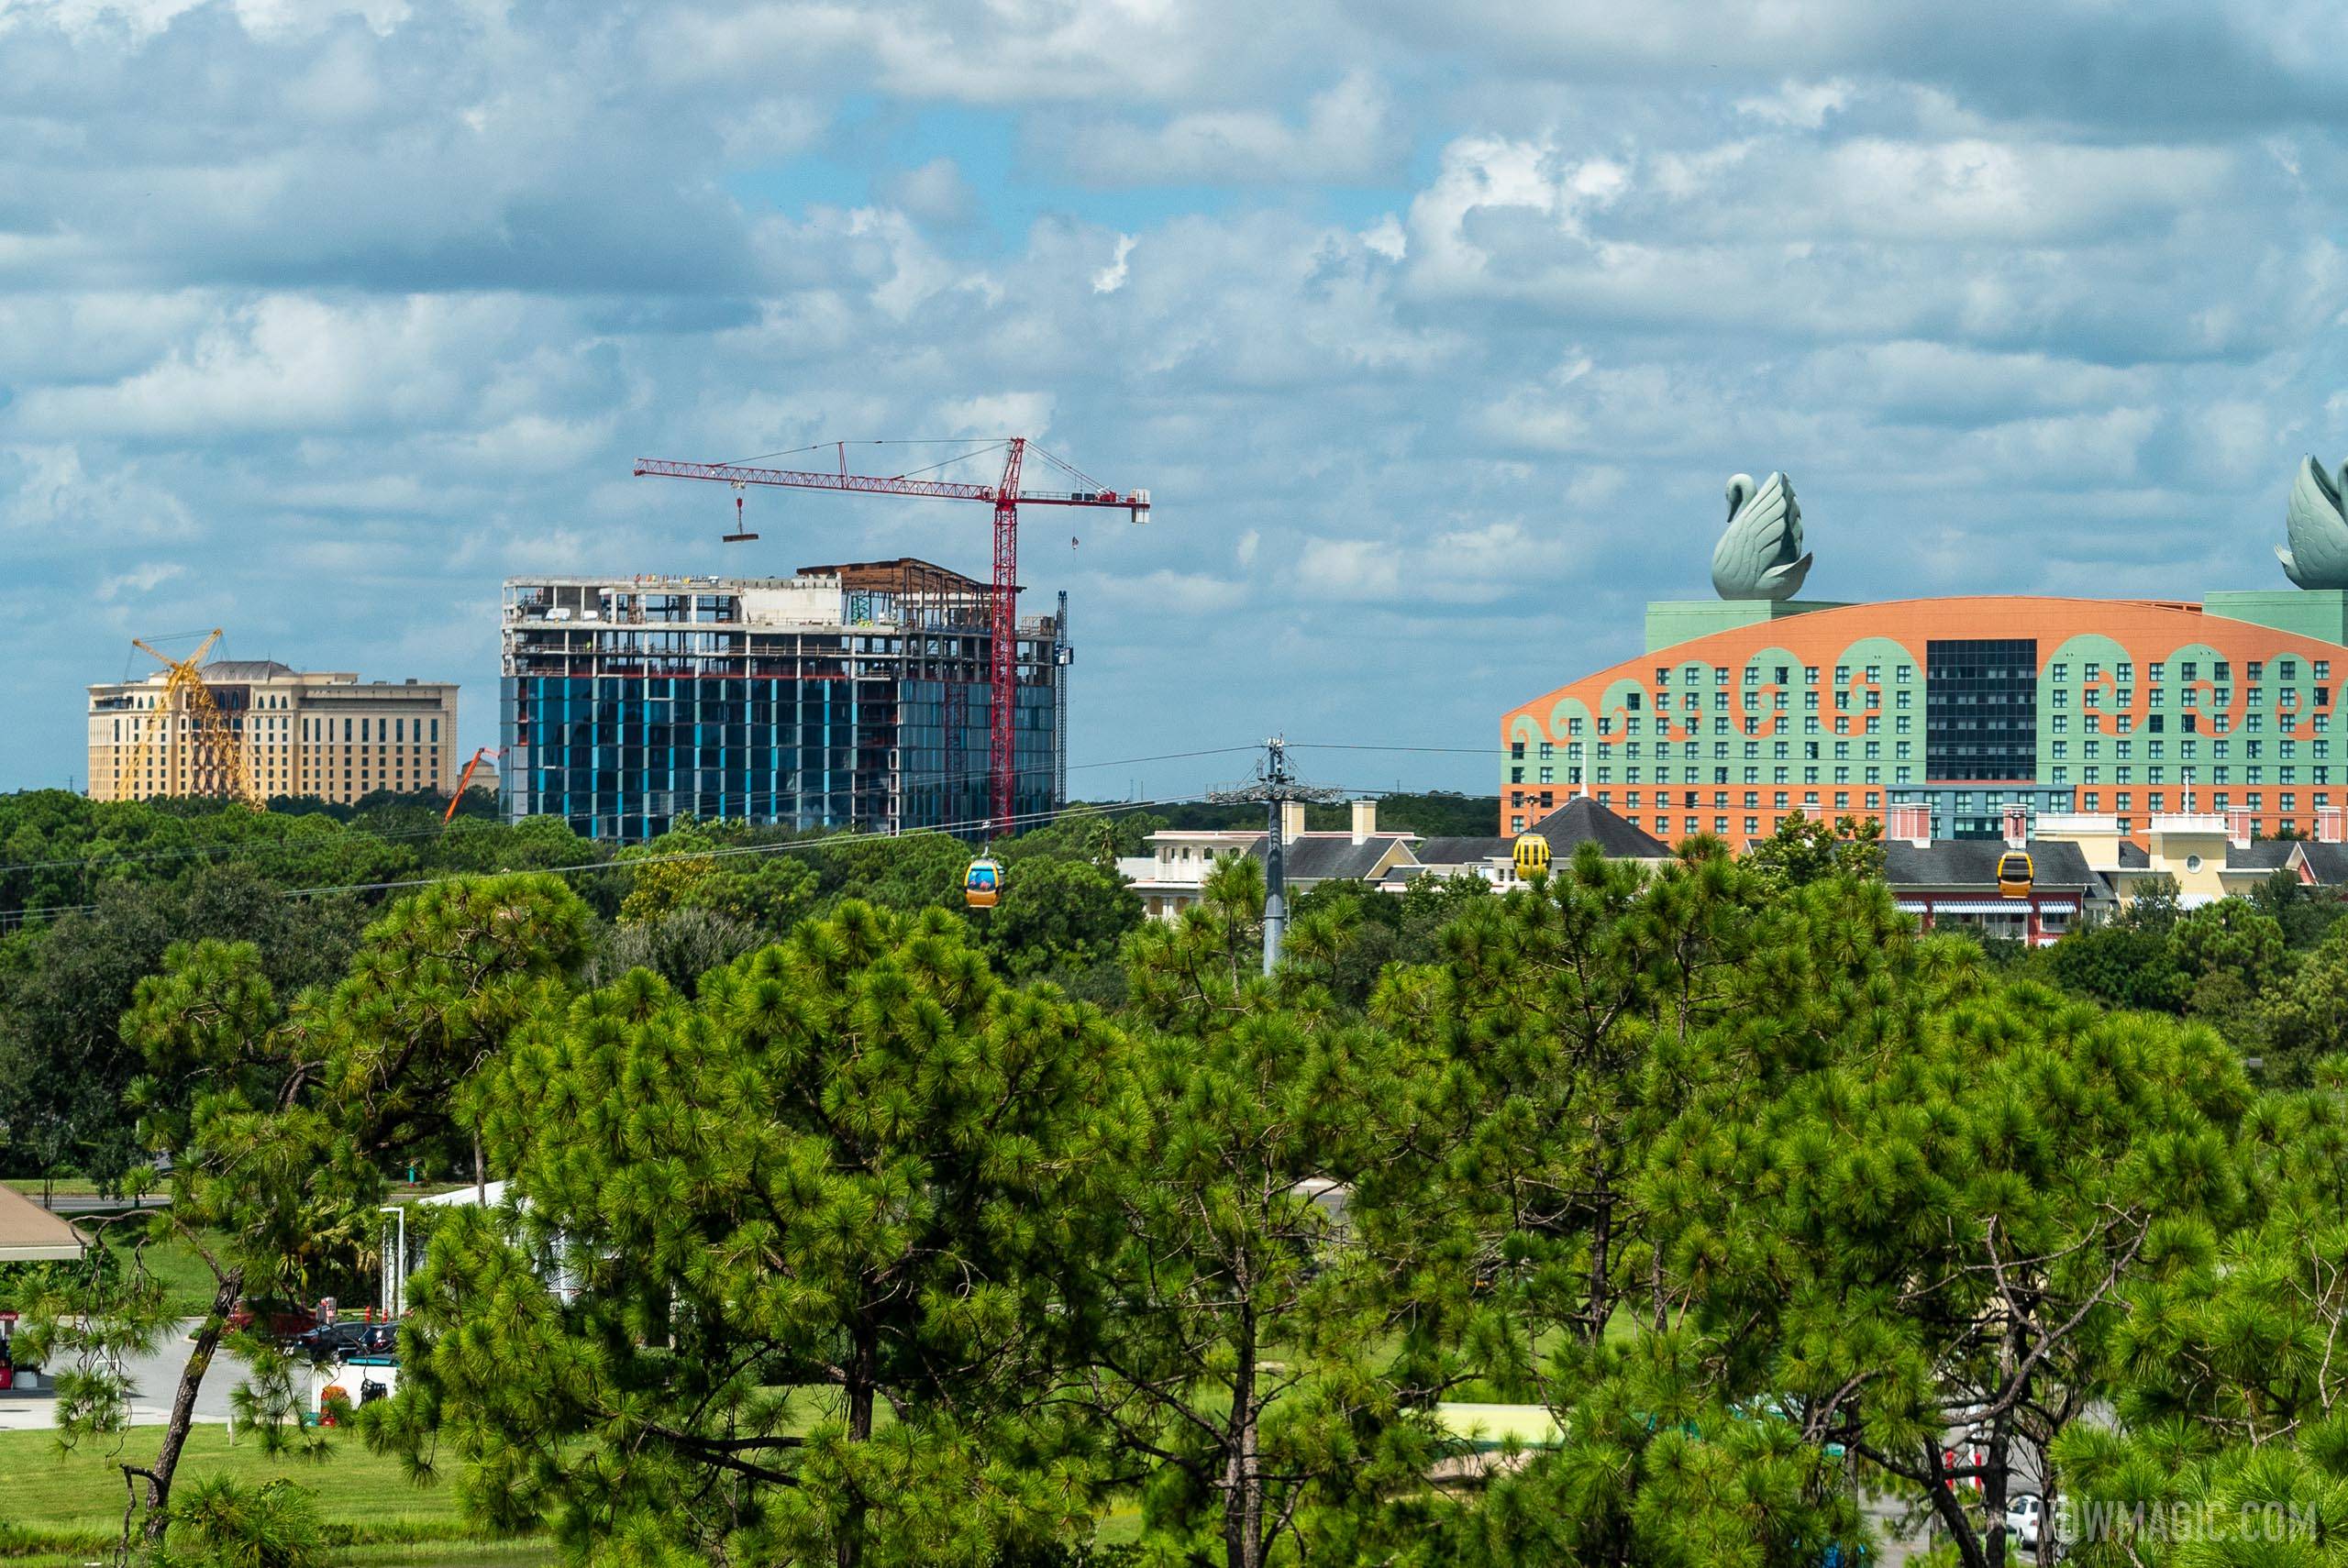 The Cove construction viewed from Skyliner - August 28 2020